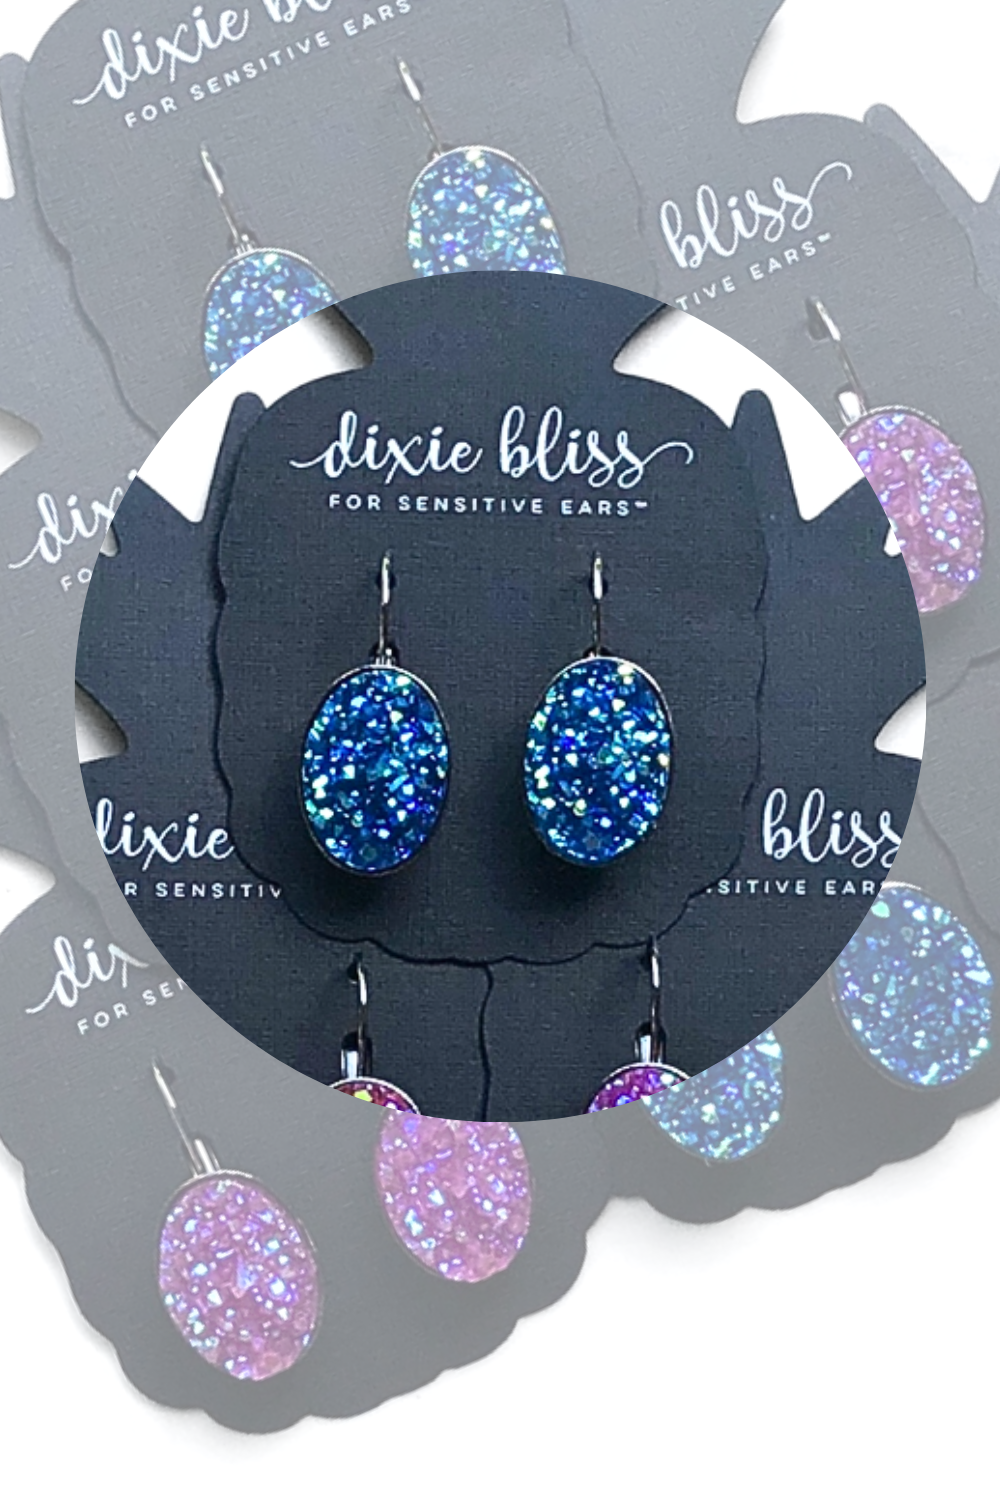 Iridescent Blue Raspberry | Dixie Bliss Earrings: Vivid Lever Backs In Blue, Pink, and Purple. All Hypoallergenic made in the USA woman-owned company druzy shiny diamond-like sparkle and shine safe & made for sensitive ears